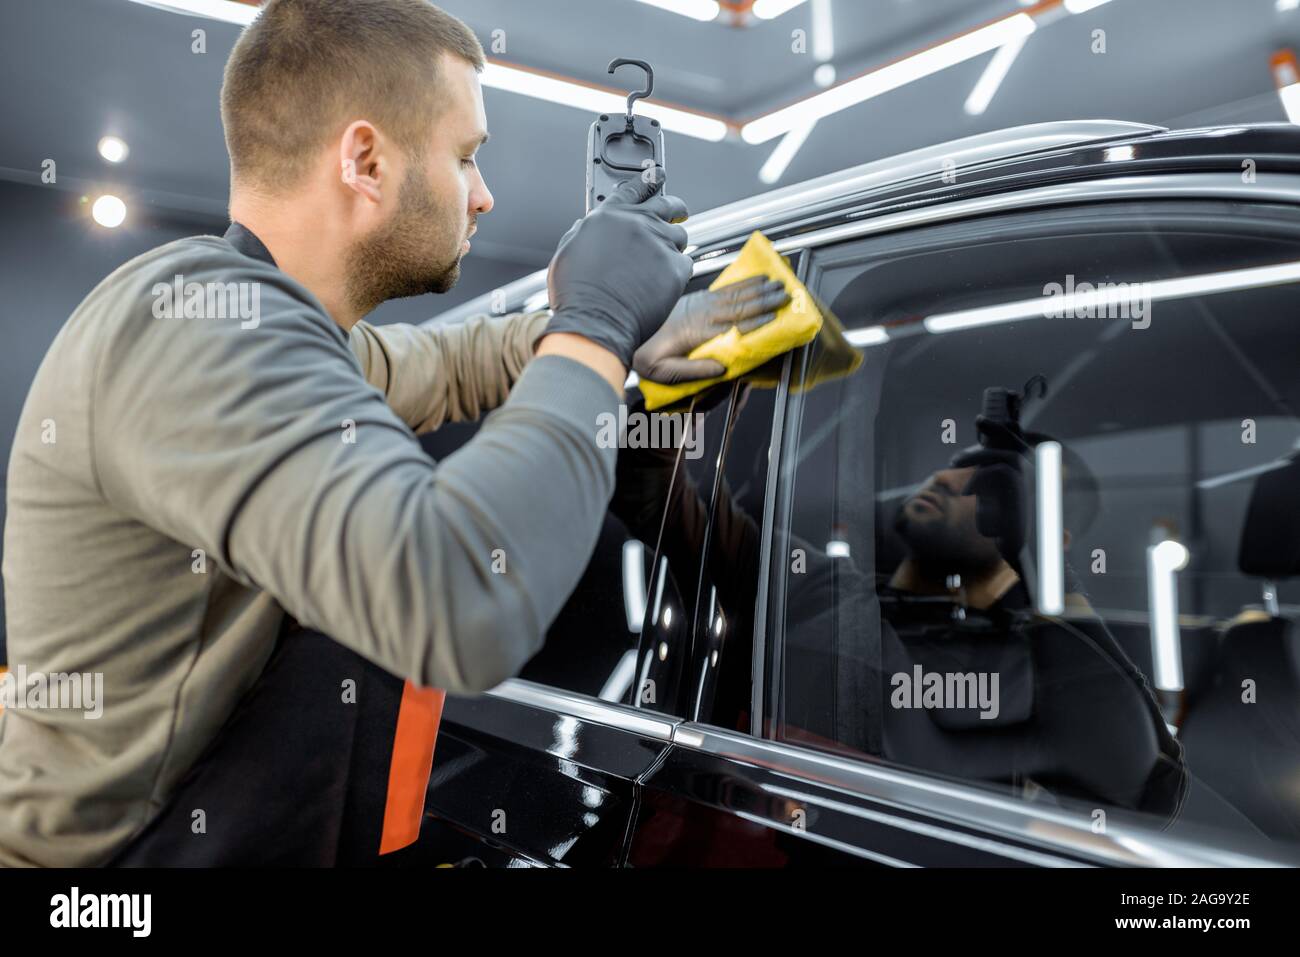 Car service worker wiping vehicle body with microfiber, examining glossy coating after the polishing procedure. Professional car detailing and maintenance concept Stock Photo